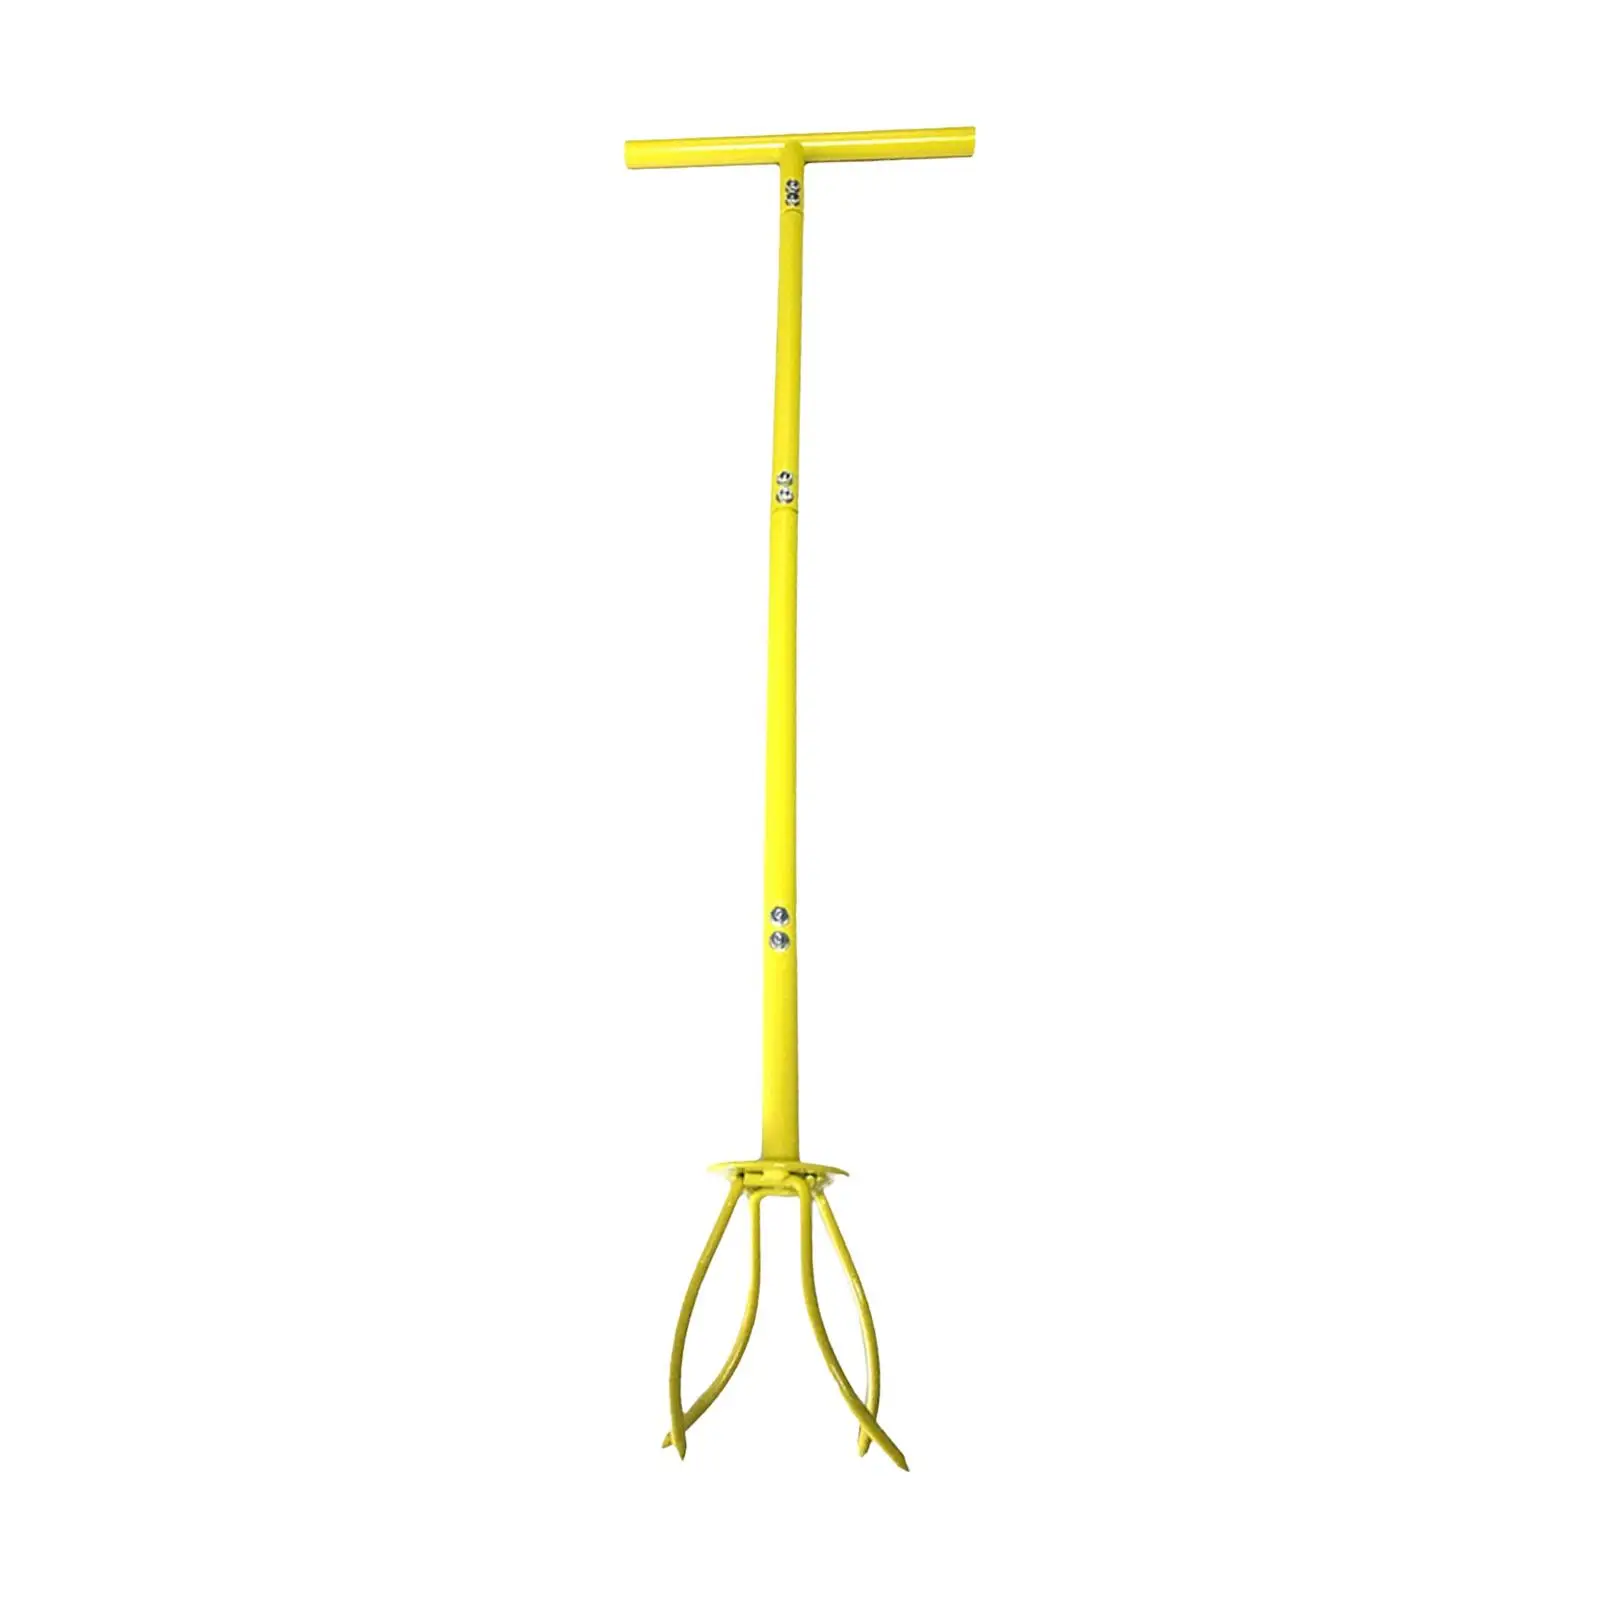 Manual Hand Tiller Detachable Durable No Bending with Adjustable Long Handle Gardening Claw Cultivator with A Removable Big Claw